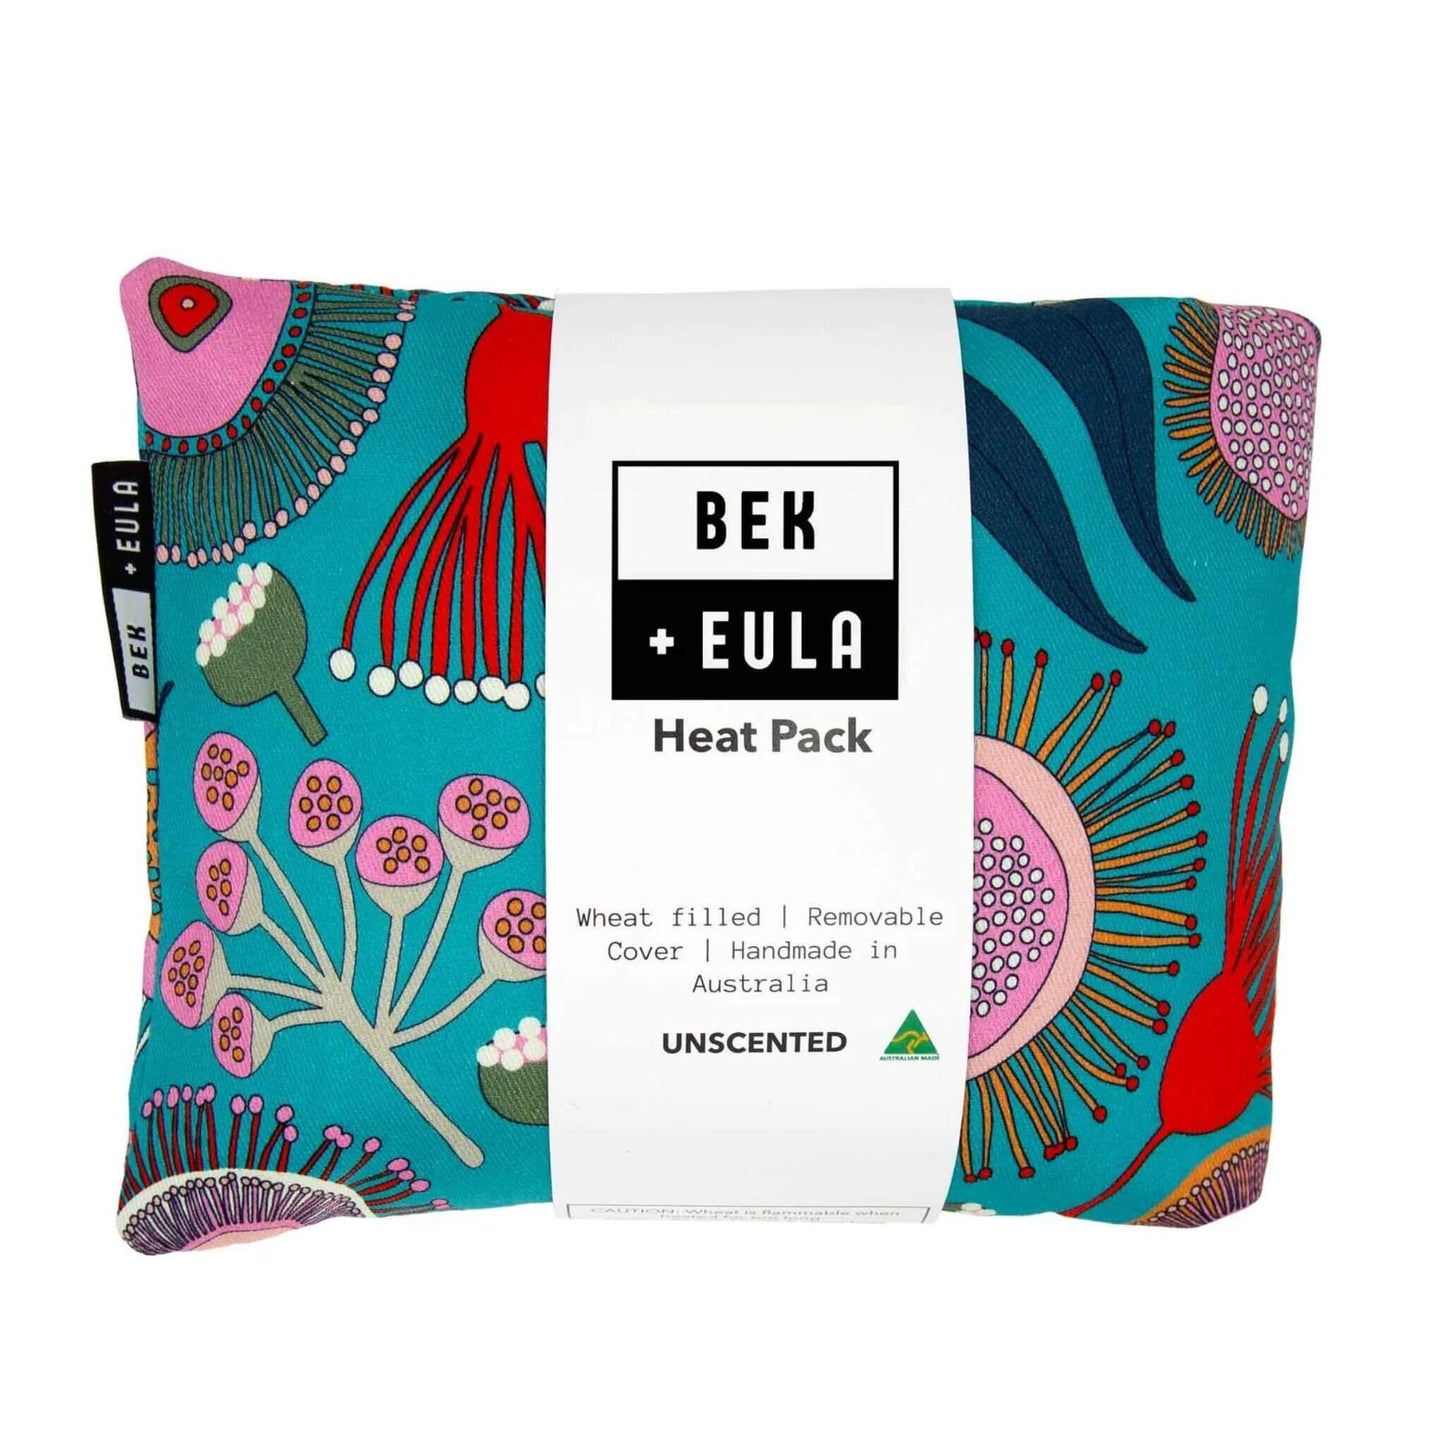 Bek + Eula wheat bag heat and cool packs in various colours - summer flowers